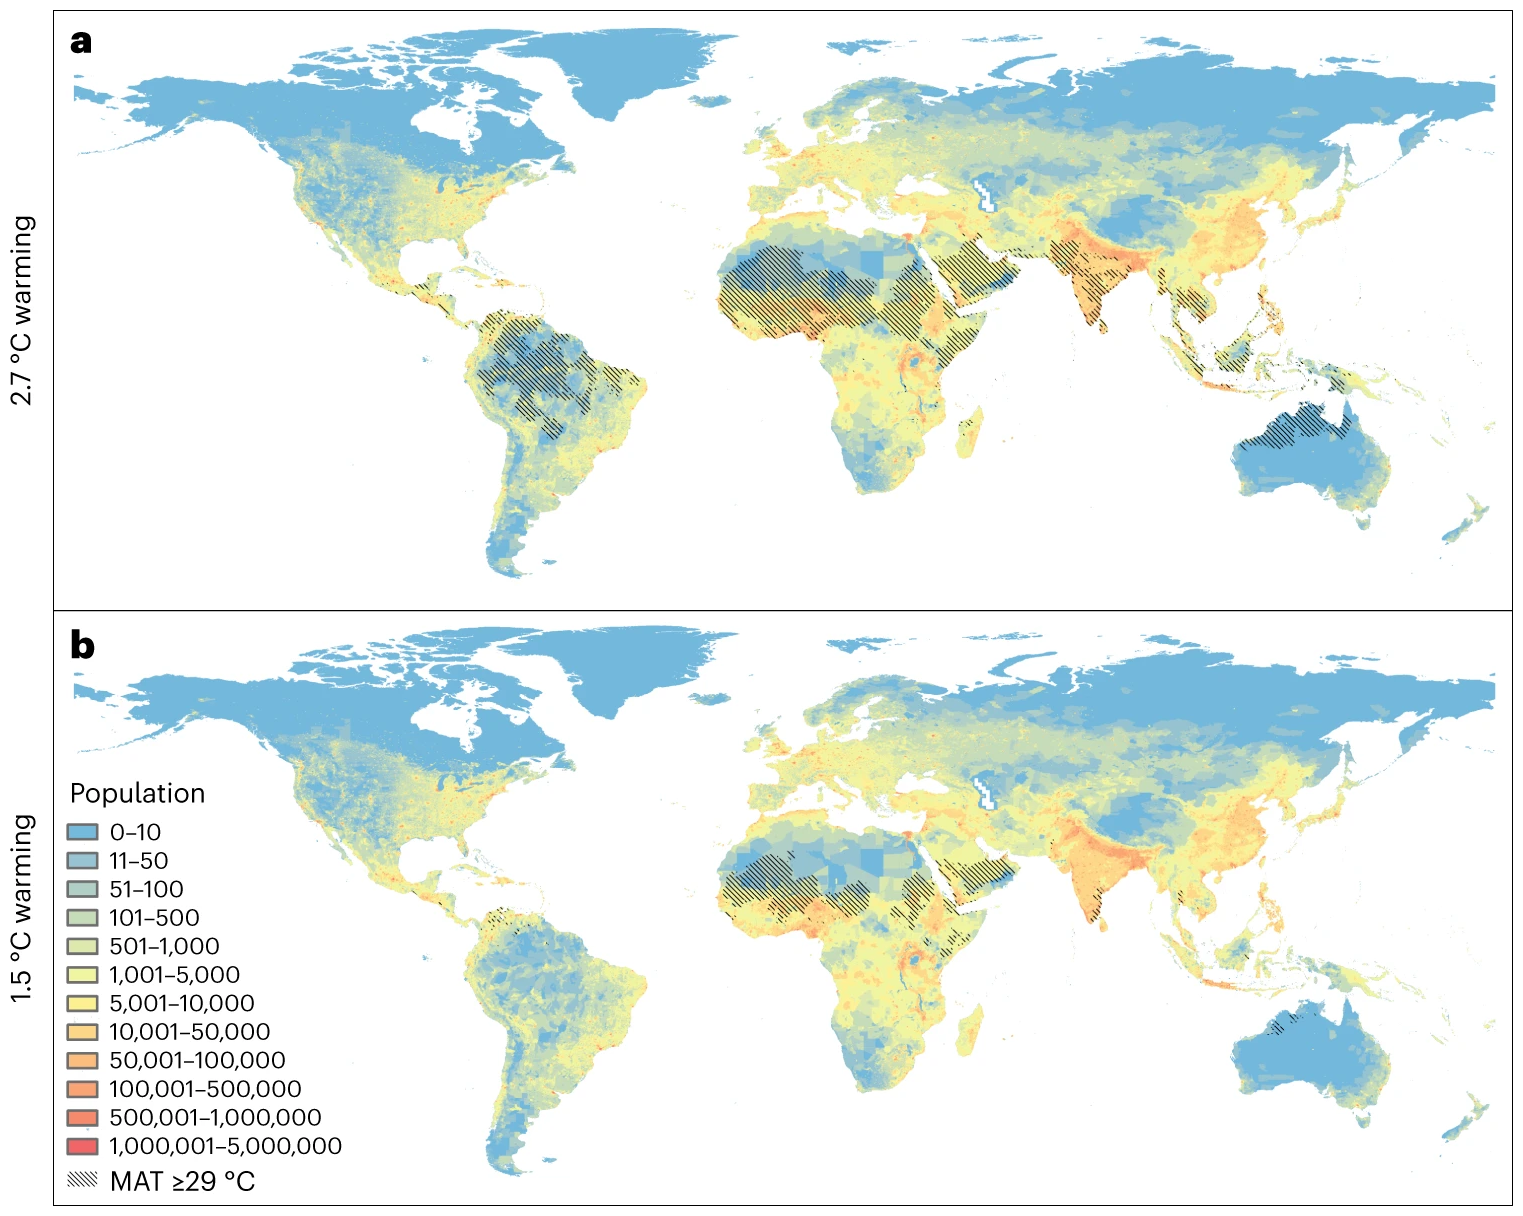 a,b, Regions exposed to unprecedented heat (MAT ≥29 °C) overlaid on population density (number in a ~100 km2 grid cell) for a world of 9.5 billion (SSP2, 2070) under 2.7 °C global warming (a) and 1.5 °C global warming (b). Graphic: Lenton, et al., 2023 / Nature Sustainability